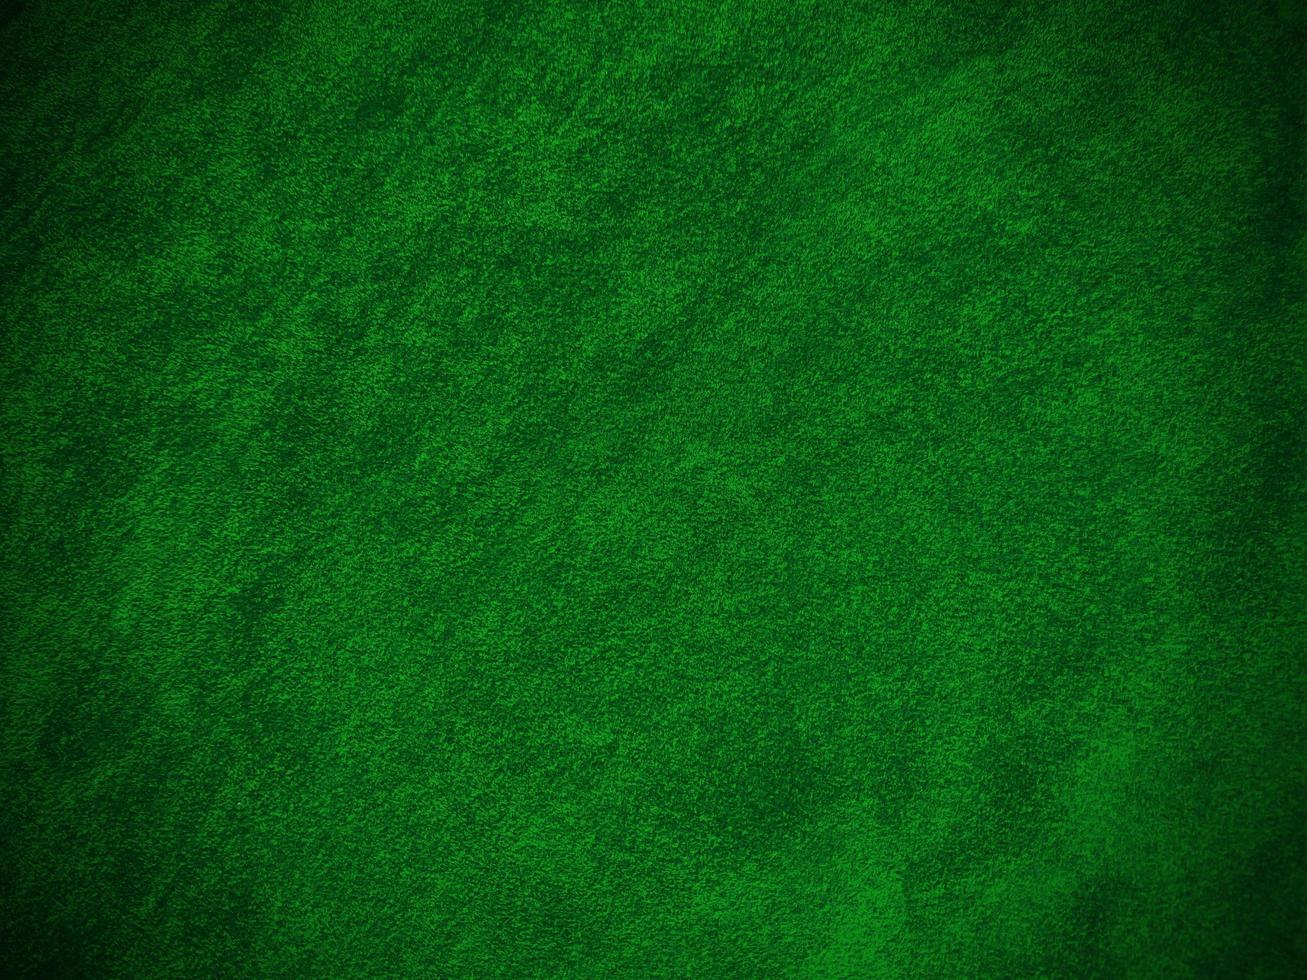 Dark green old velvet fabric texture used as background. Empty green fabric background of soft and smooth textile material. There is space for text... photo